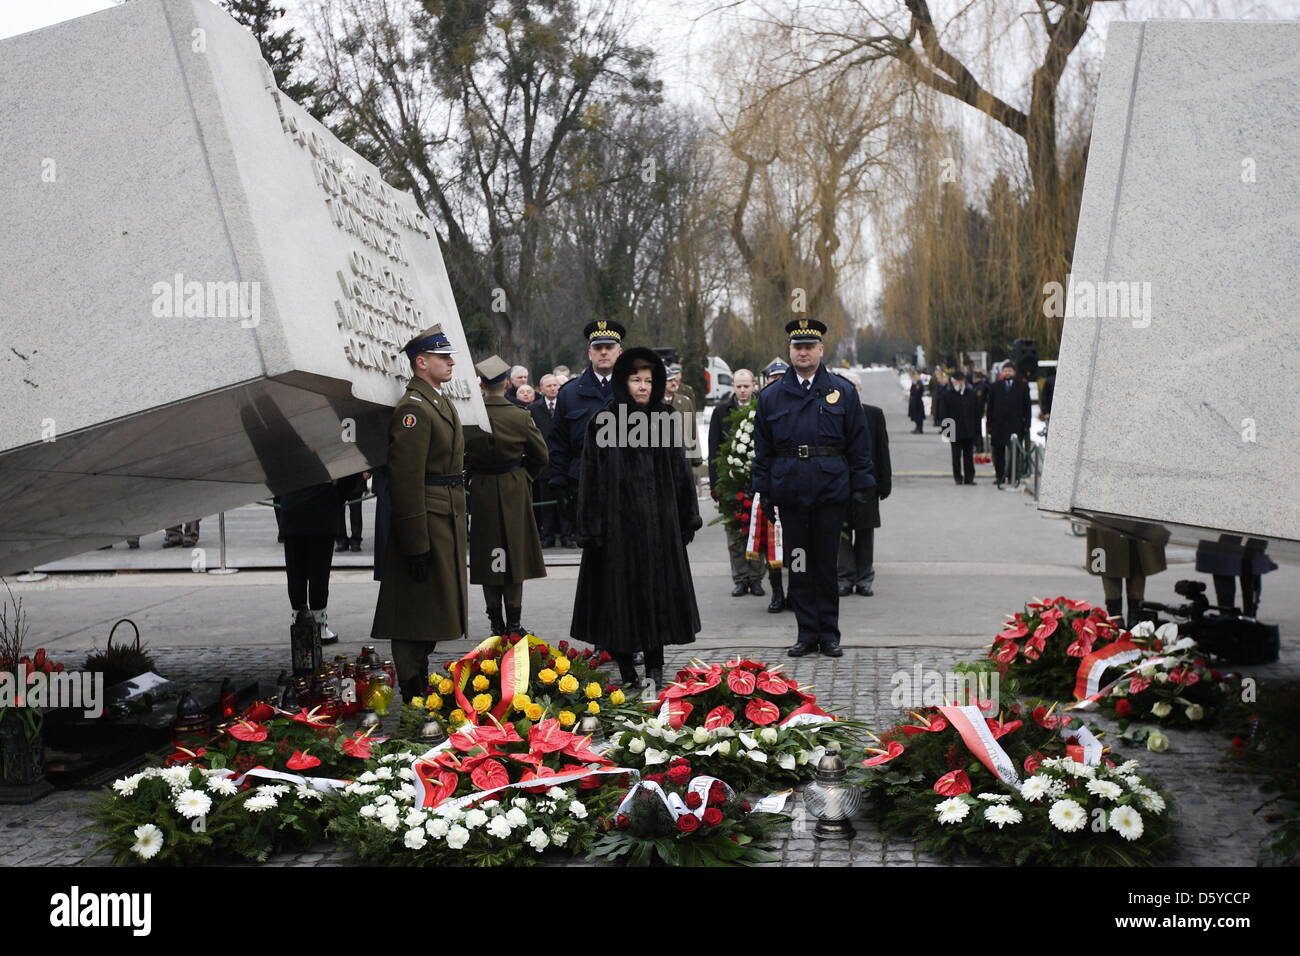 Warsaw, Poland. 10th April 2013. 3rd anniversary of Polish presidental plane crash in Smolensk, Russia in 2010. Government and Parliament members and families lays flowers under the Victims of The Presidental Plane Catastrophe monument in Warsaw at Powazki cemetery. Hanna Gronkiewicz - Waltz Mayor of Warsaw takes part in the ceremony Credit: Michal Fludra / Alamy Live NewsCredit: Michal Fludra /Alamy Live News Stock Photo